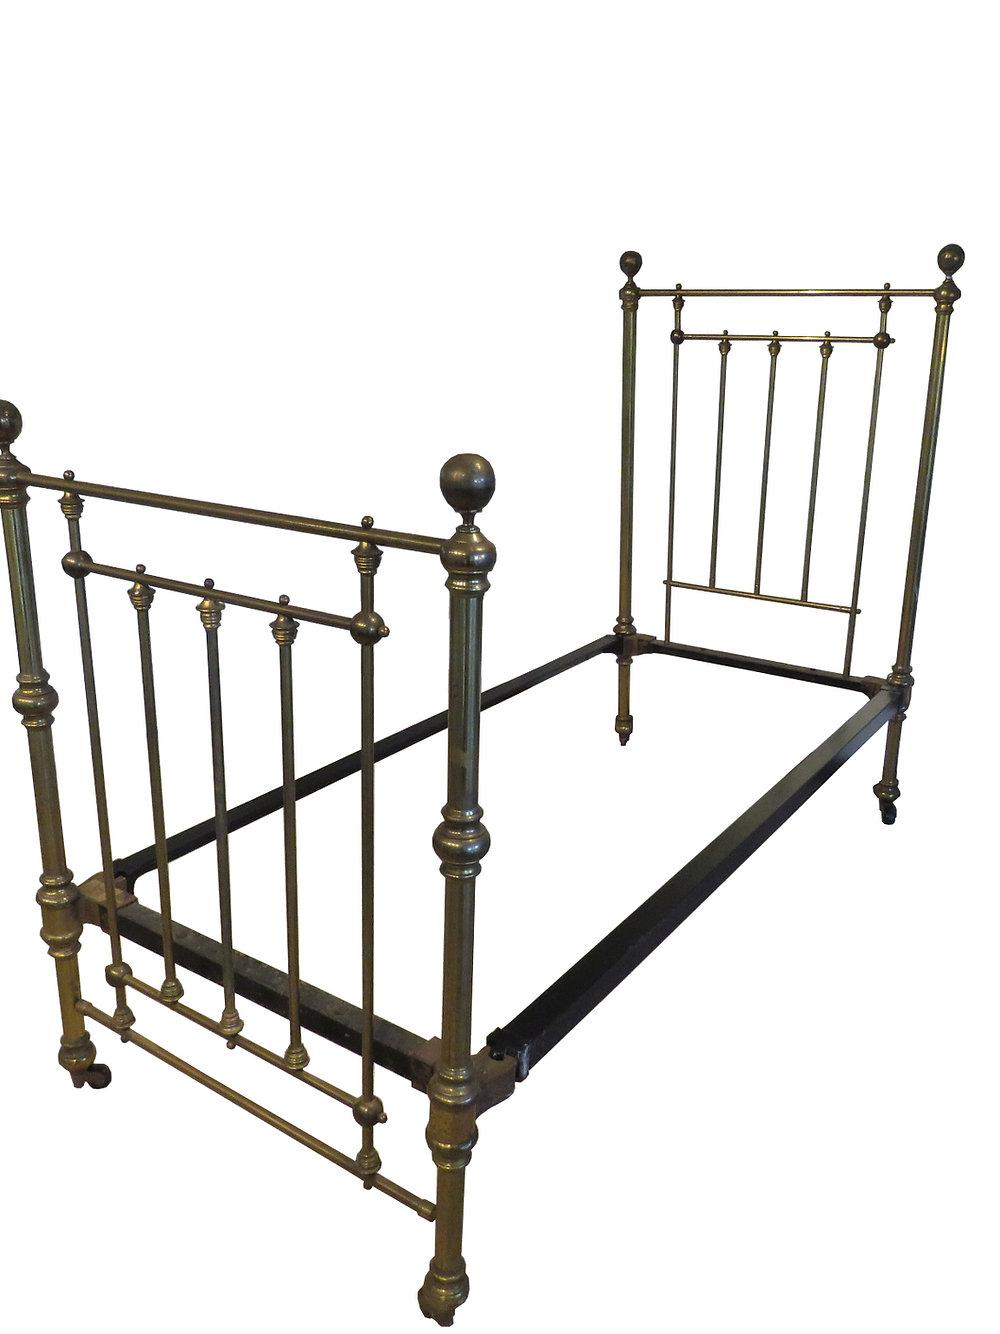 Good quality English Victorian (3' wide) all brass bedstead which is awaiting restoration. The bed frame will be polished prior to being dispatched.
The frame comes complete with a new superior firm bed base. 
UK and Worldwide shipping